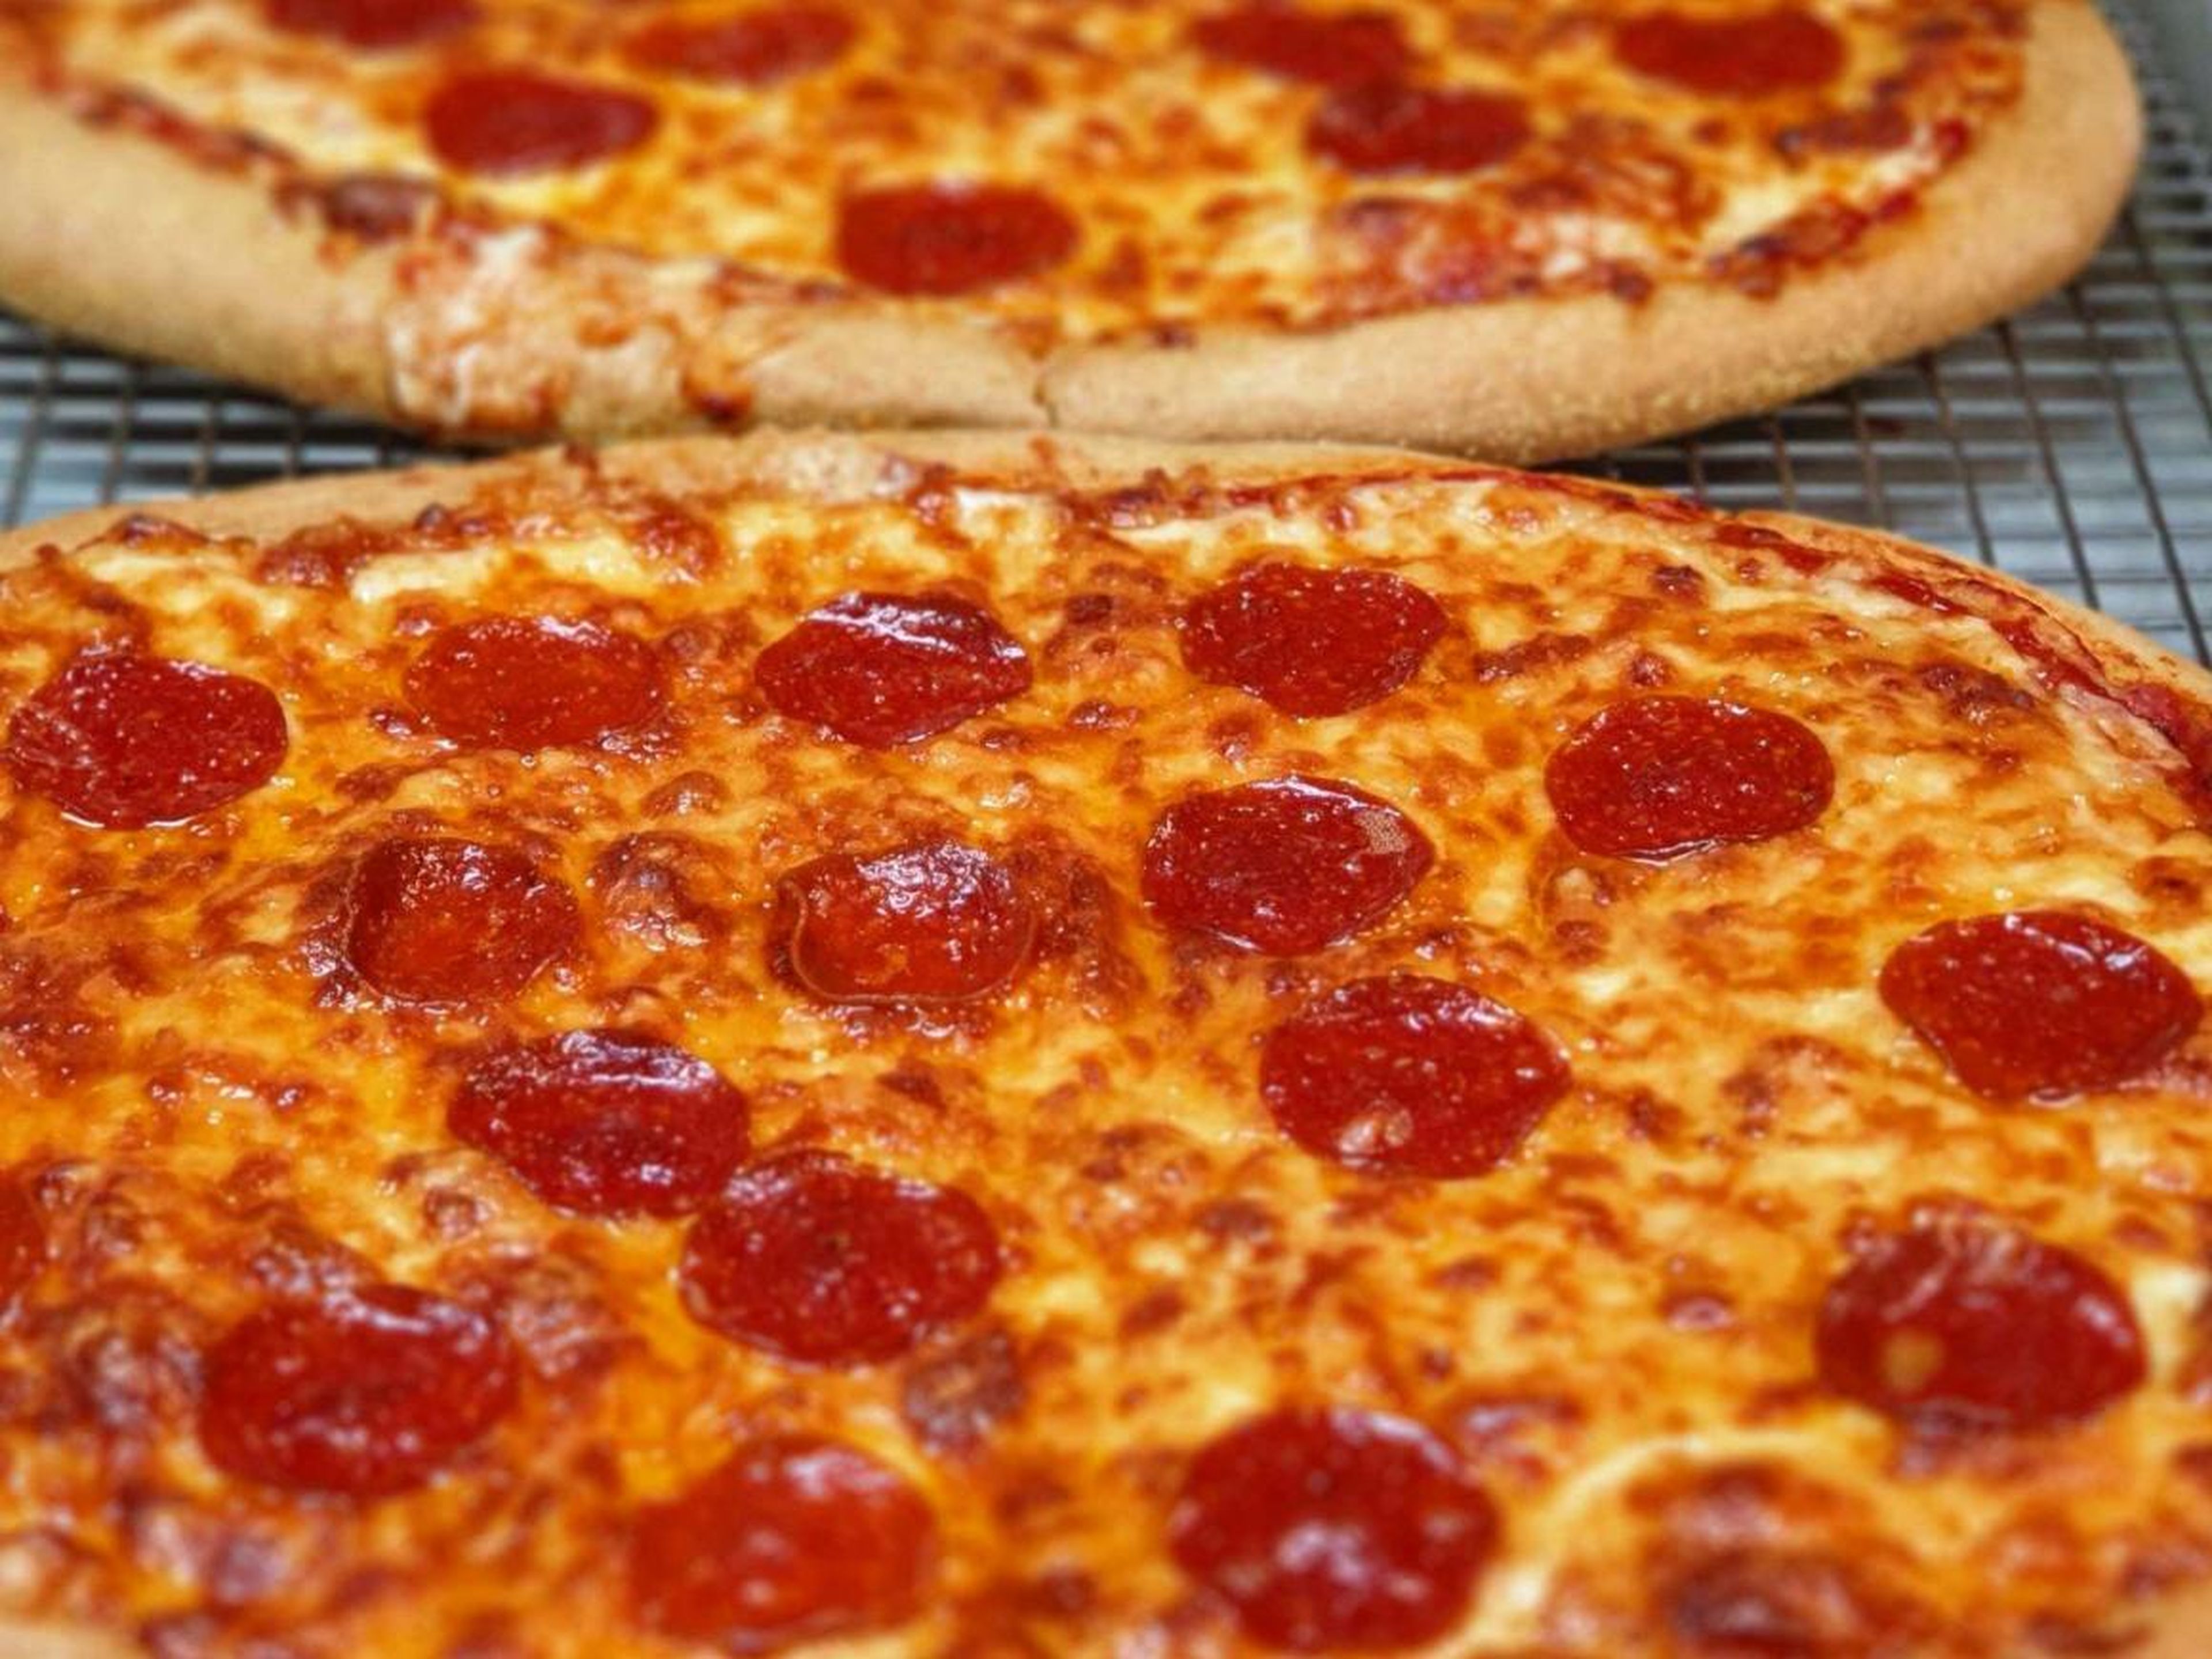 Brigaid recently started offering kids pepperoni pizza on homemade crust.